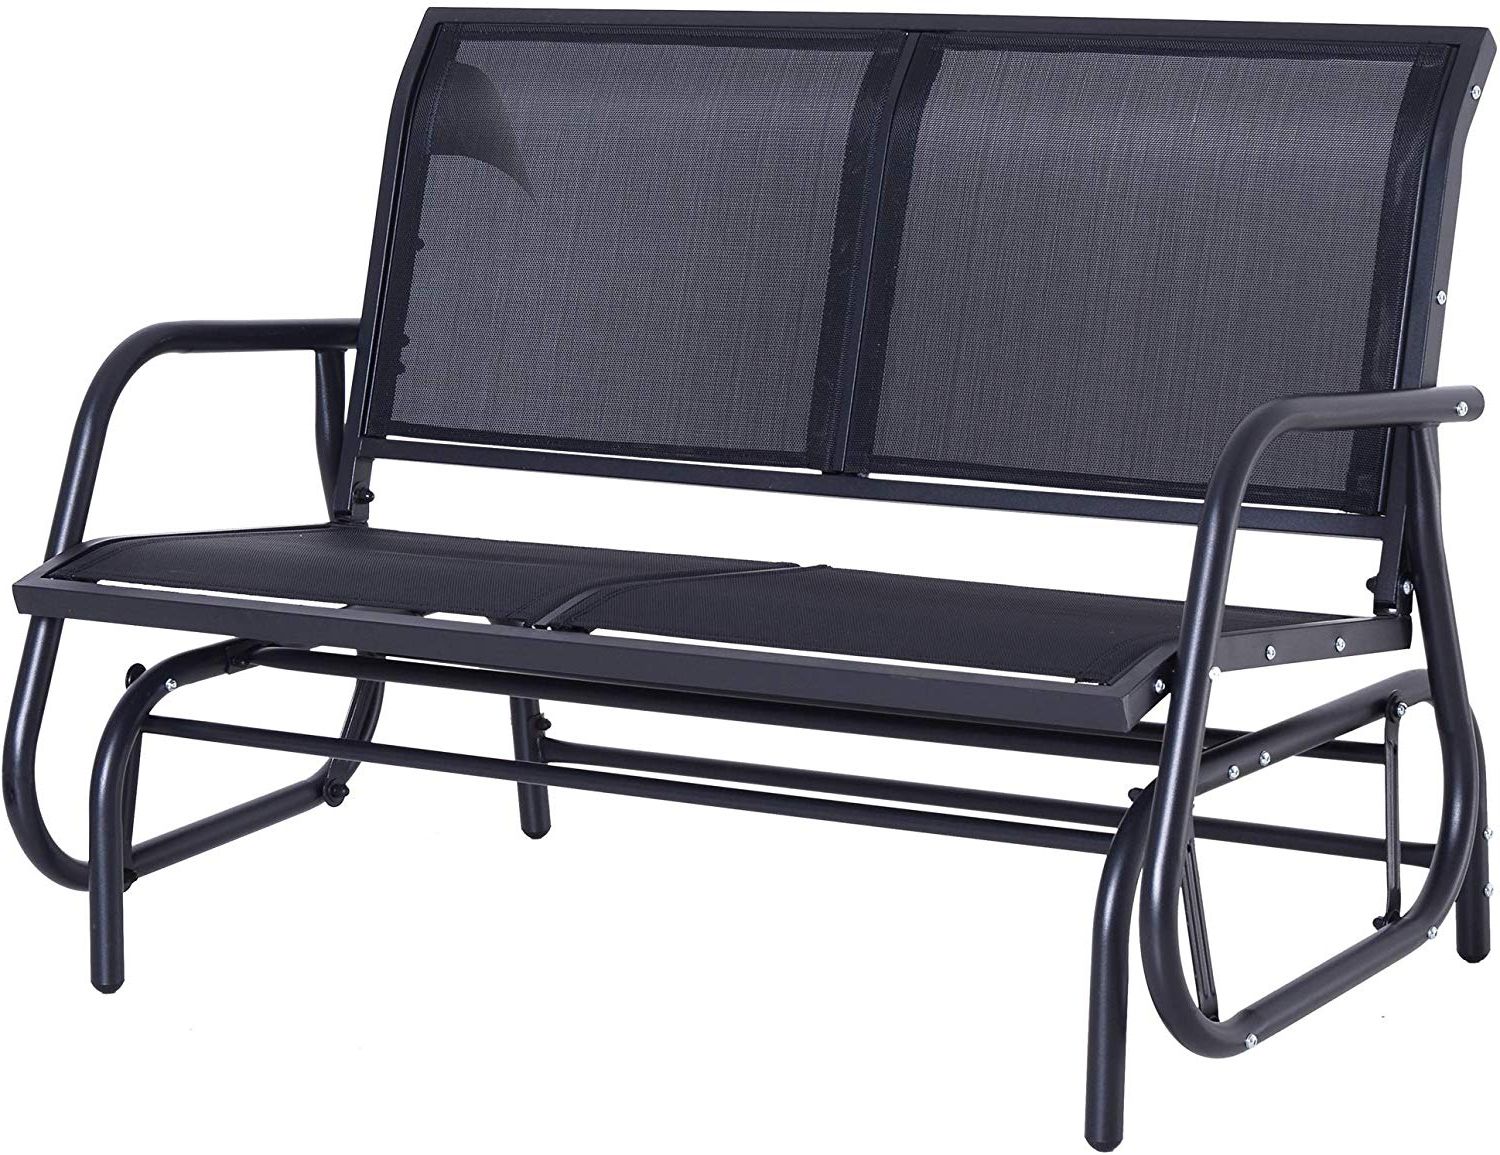 Trendy Steel Patio Swing Glider Benches Pertaining To Outsunny 48" Outdoor Patio Swing Glider Bench Chair – Dark Gray (View 23 of 30)